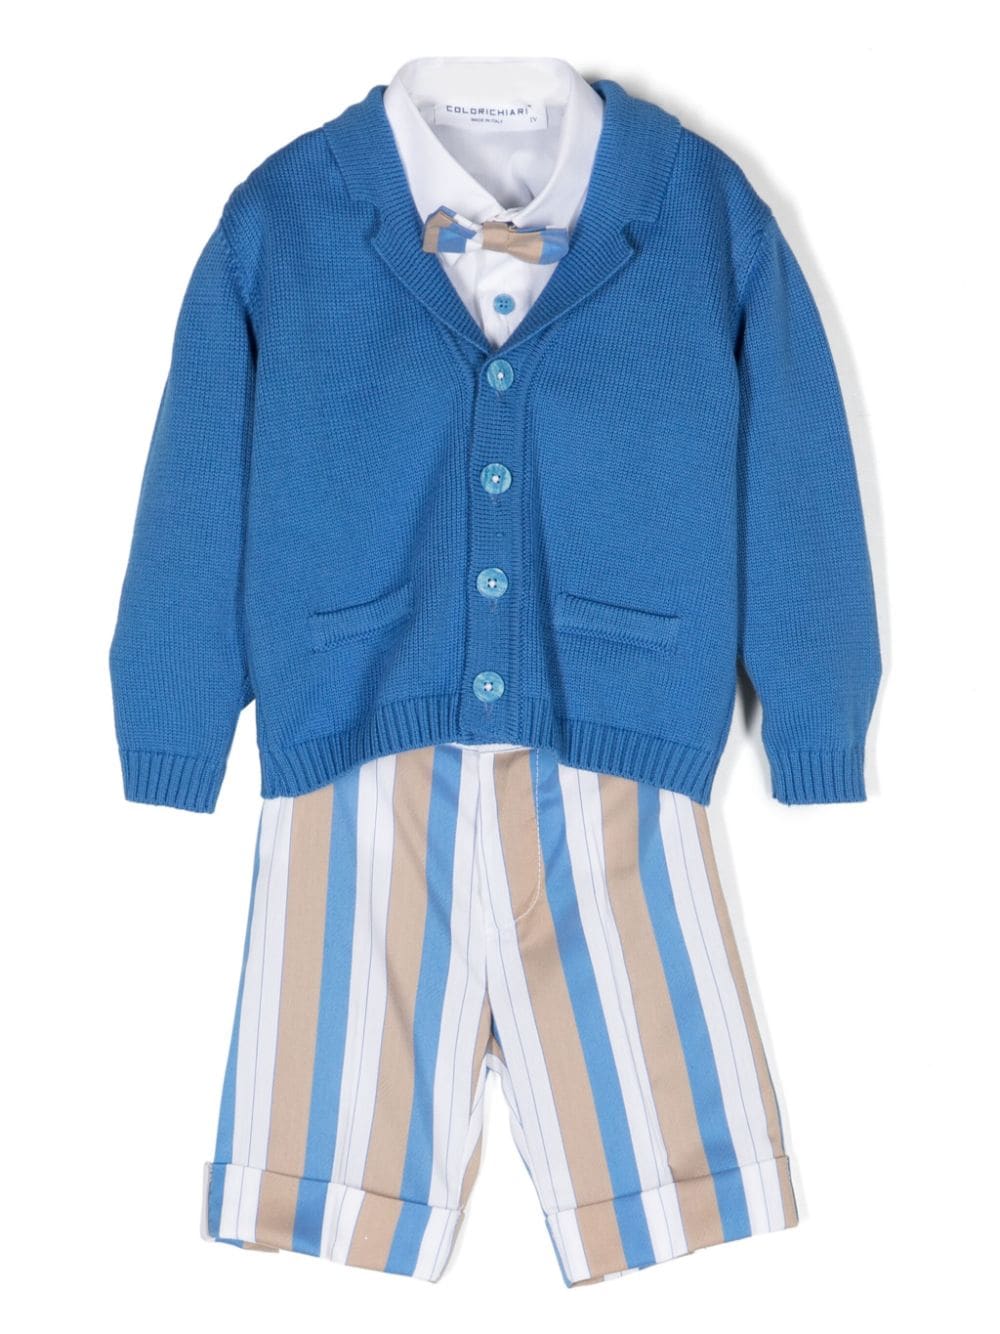 Elegant white, blue and beige outfit for newborns